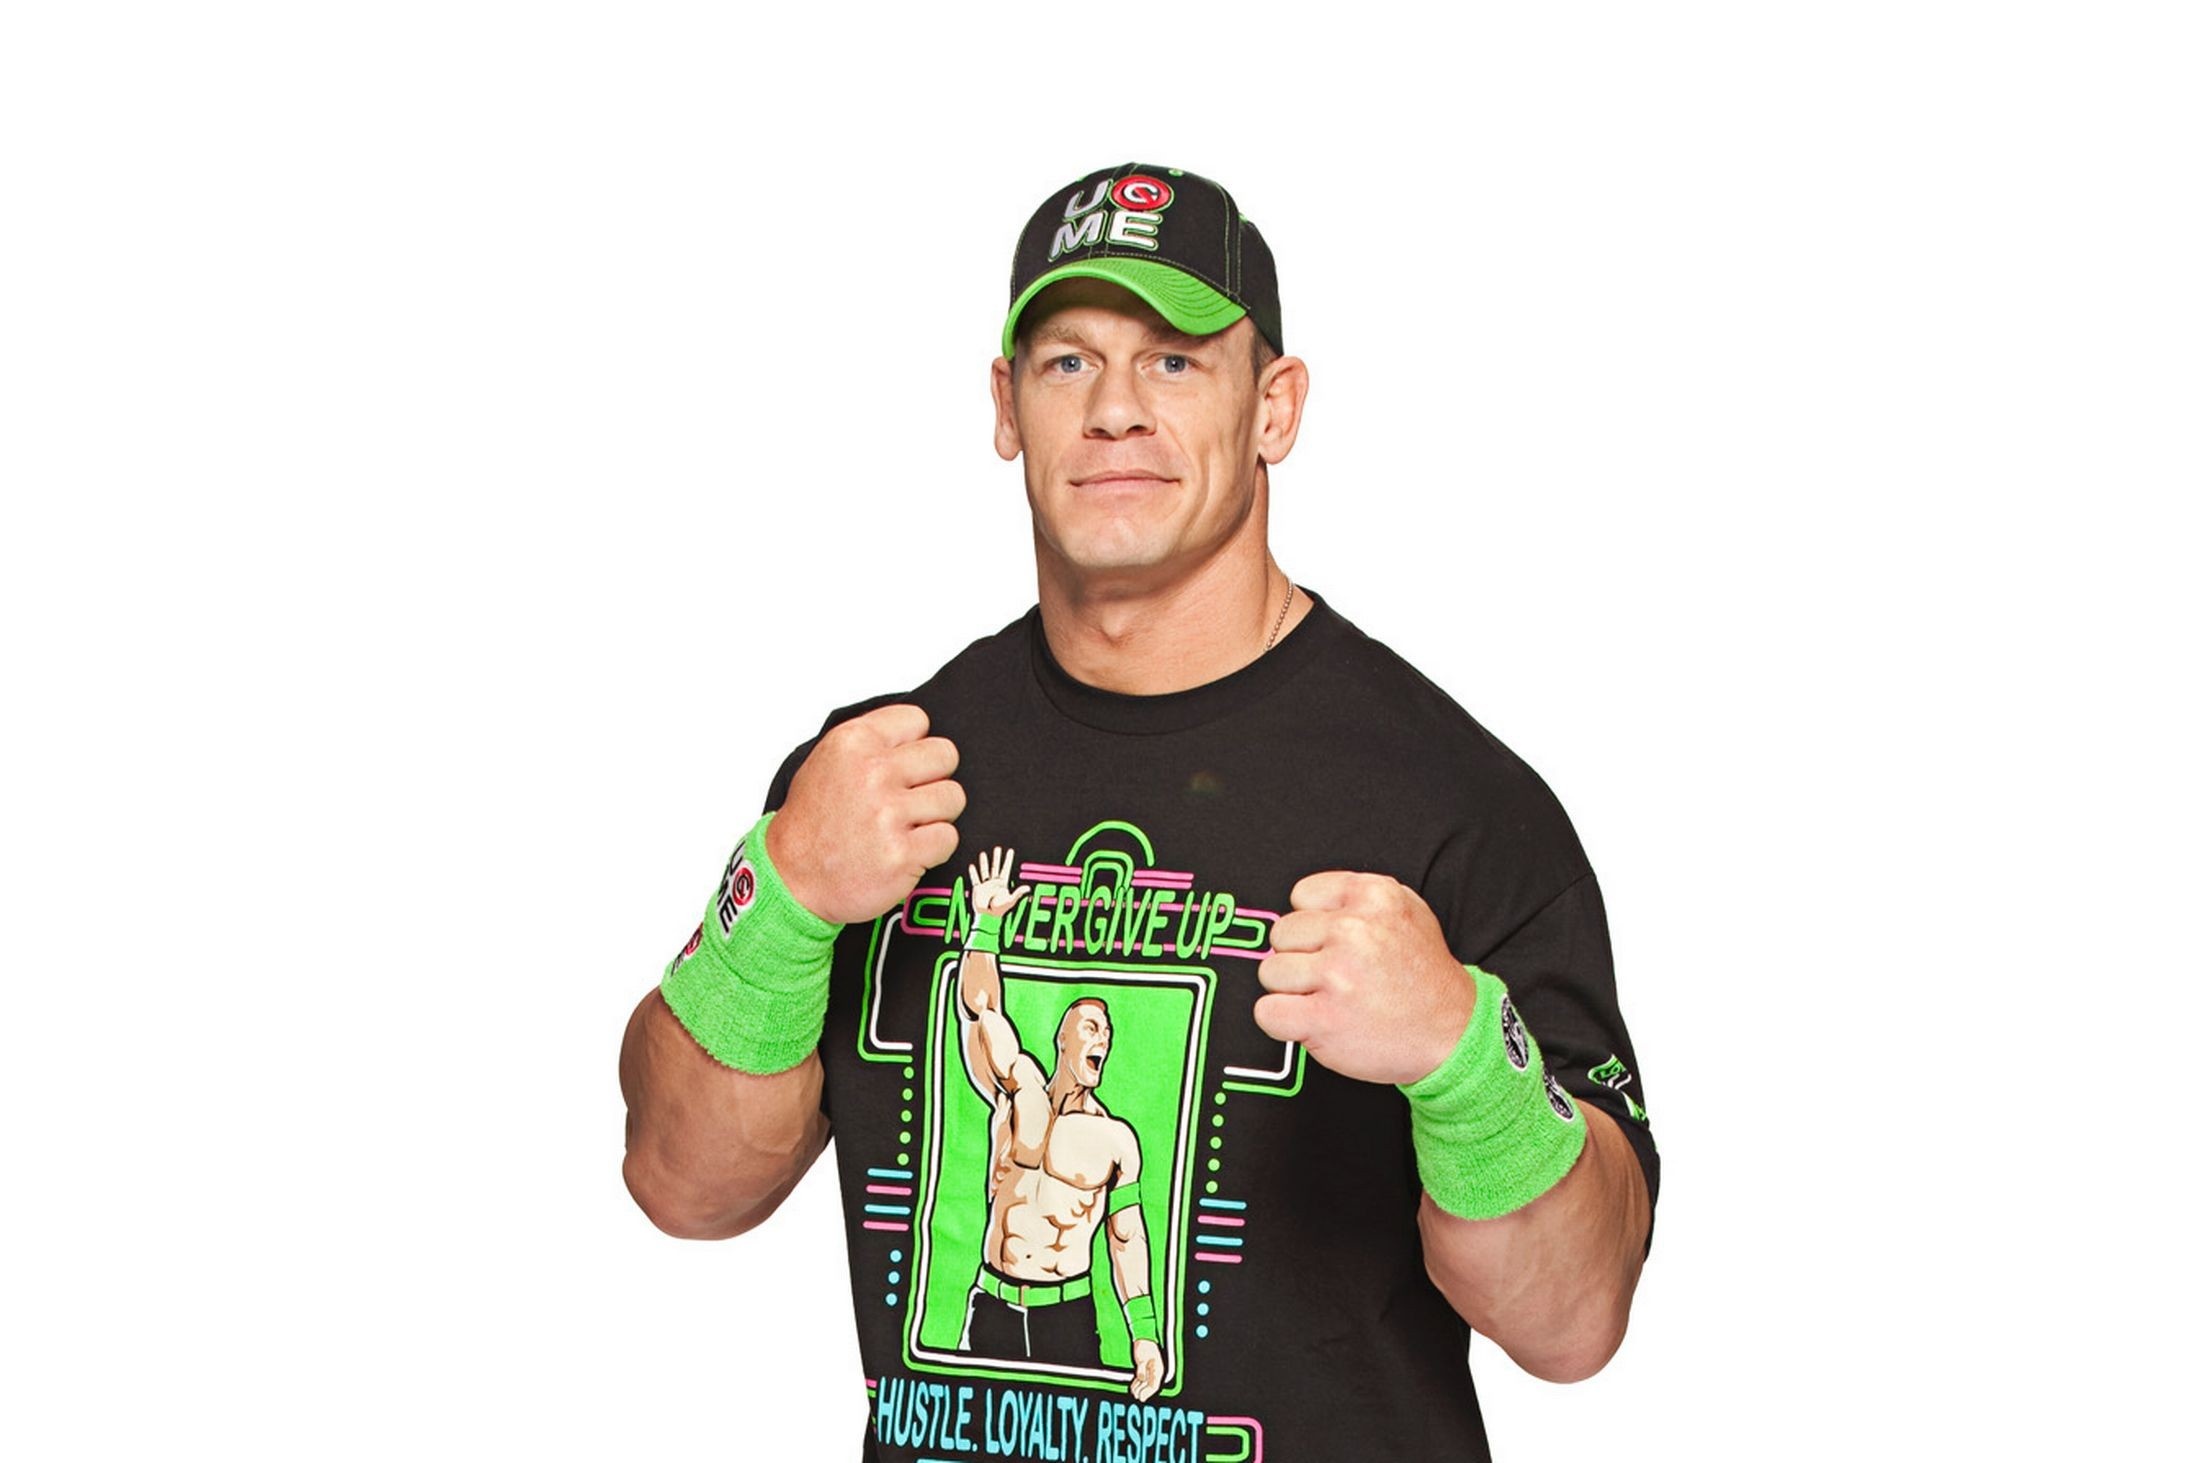 John Cena movies, Free download HD wallpapers, Extensive collection, Vibrant images, 2200x1470 HD Desktop